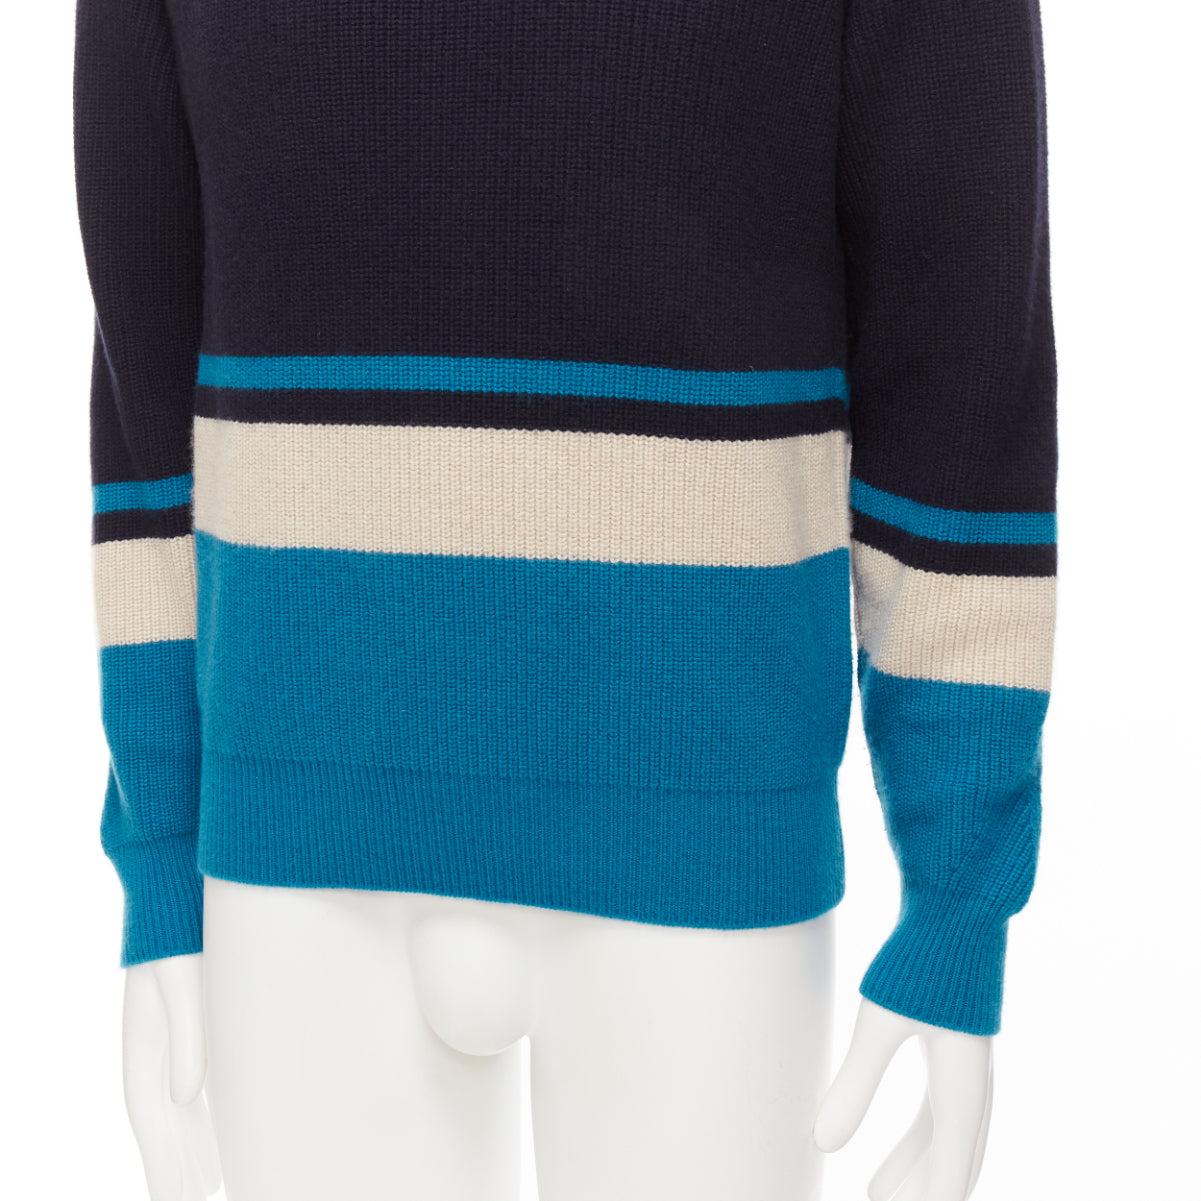 LORO PIANA 100% baby cashmere navy blue colorblocked sweater IT46 S
Reference: YIKK/A00011
Brand: Loro Piana
Material: Cashmere
Color: Blue, Navy
Pattern: Striped
Closure: Pullover
Made in: Italy

CONDITION:
Condition: Excellent, this item was